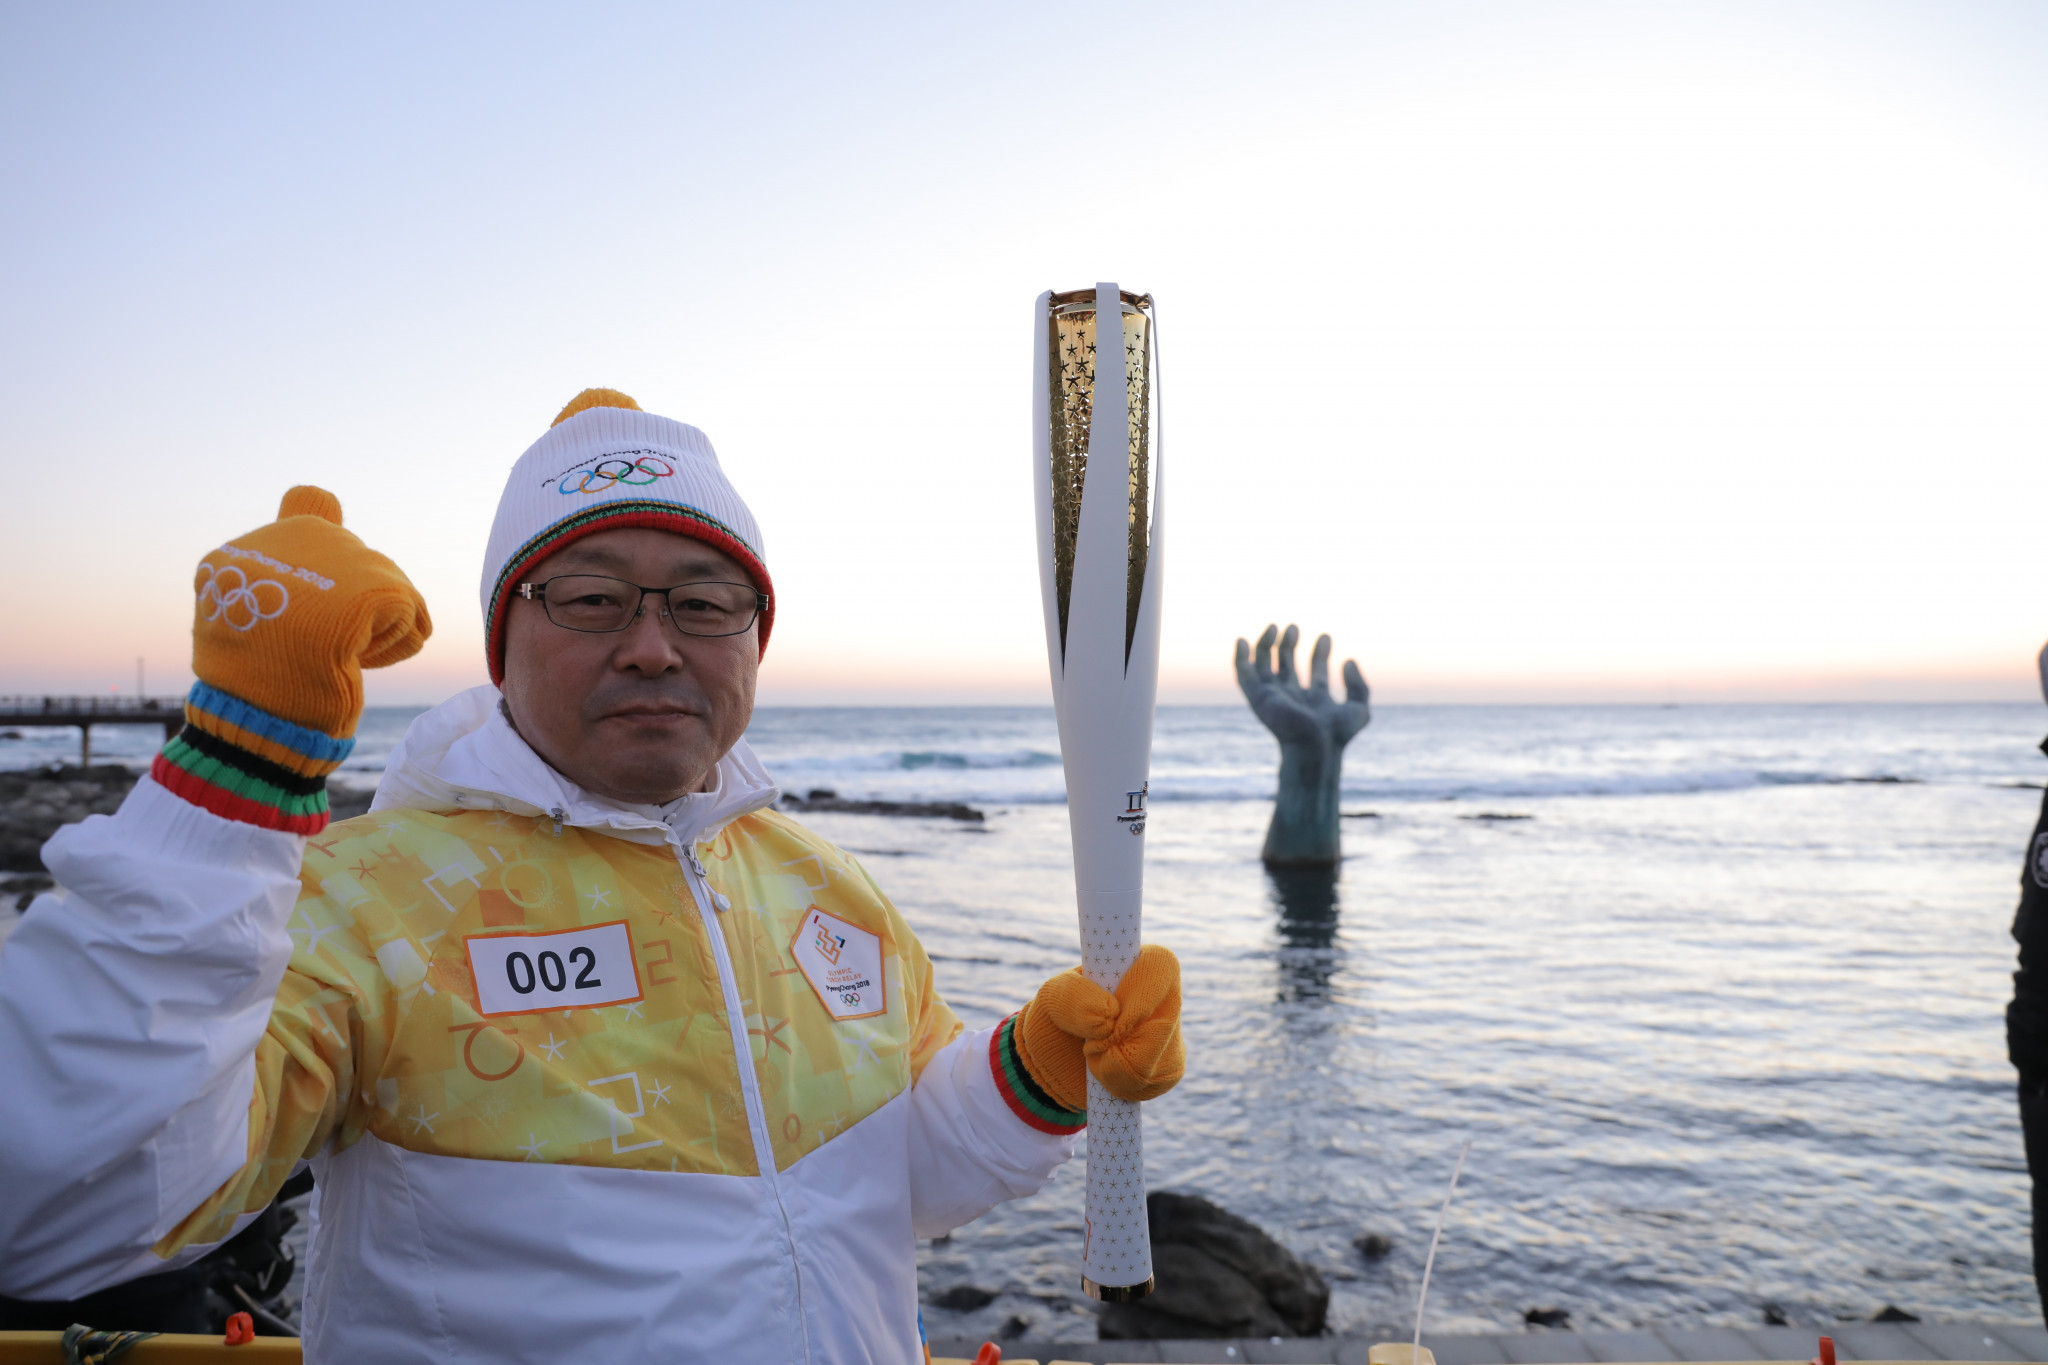 Pyeongchang 2018 Torch Relay welcomes in New Year